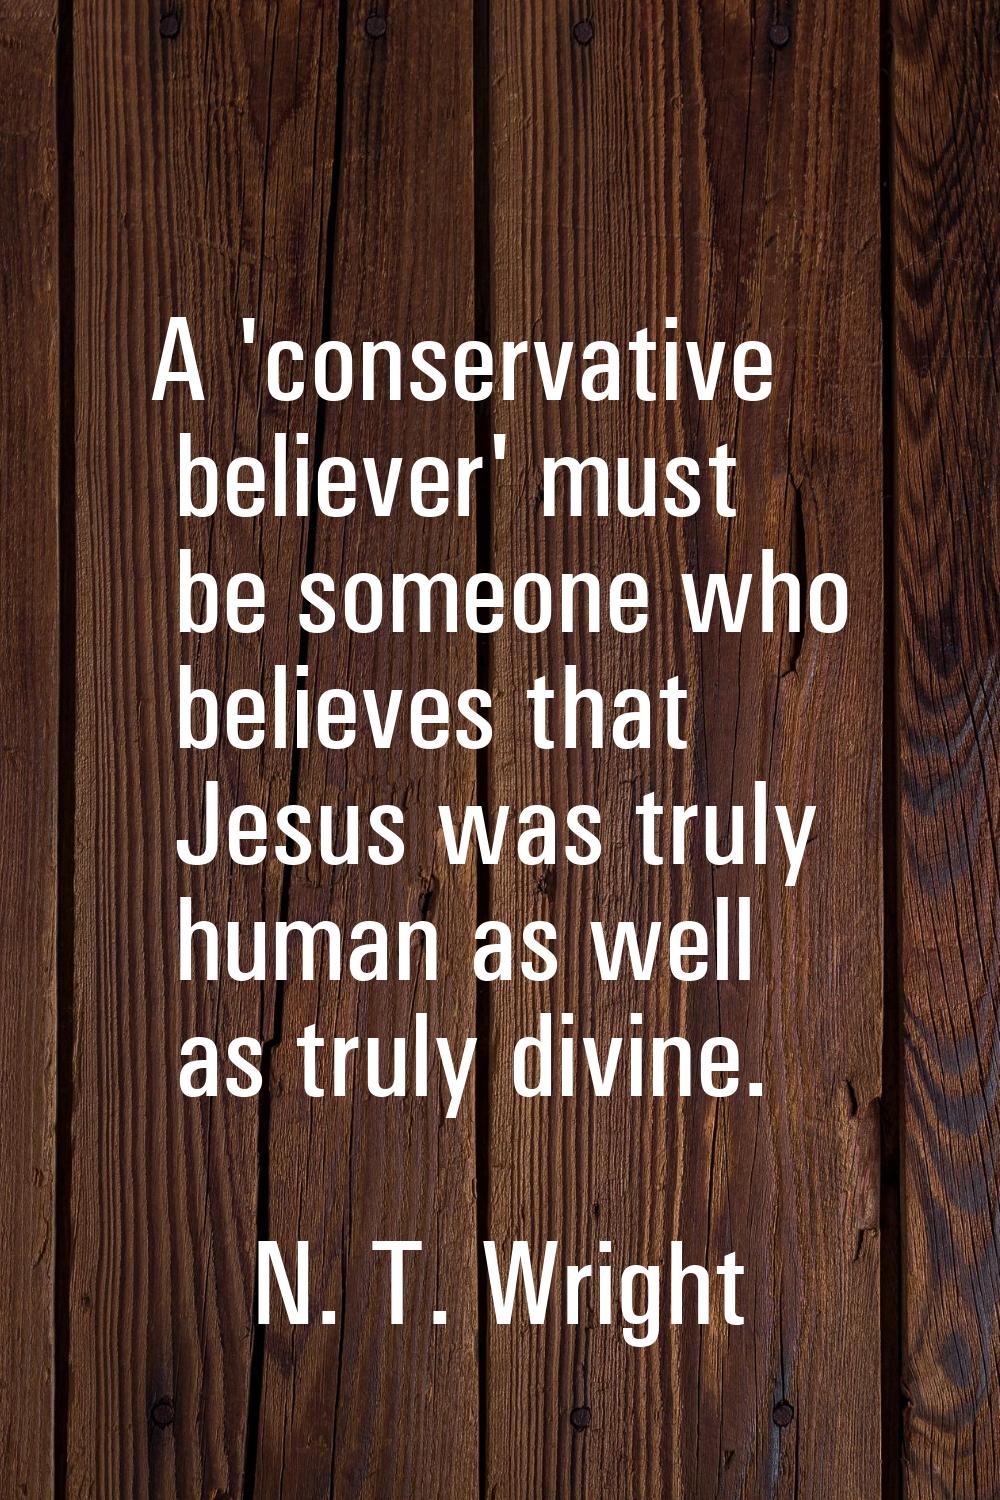 A 'conservative believer' must be someone who believes that Jesus was truly human as well as truly 